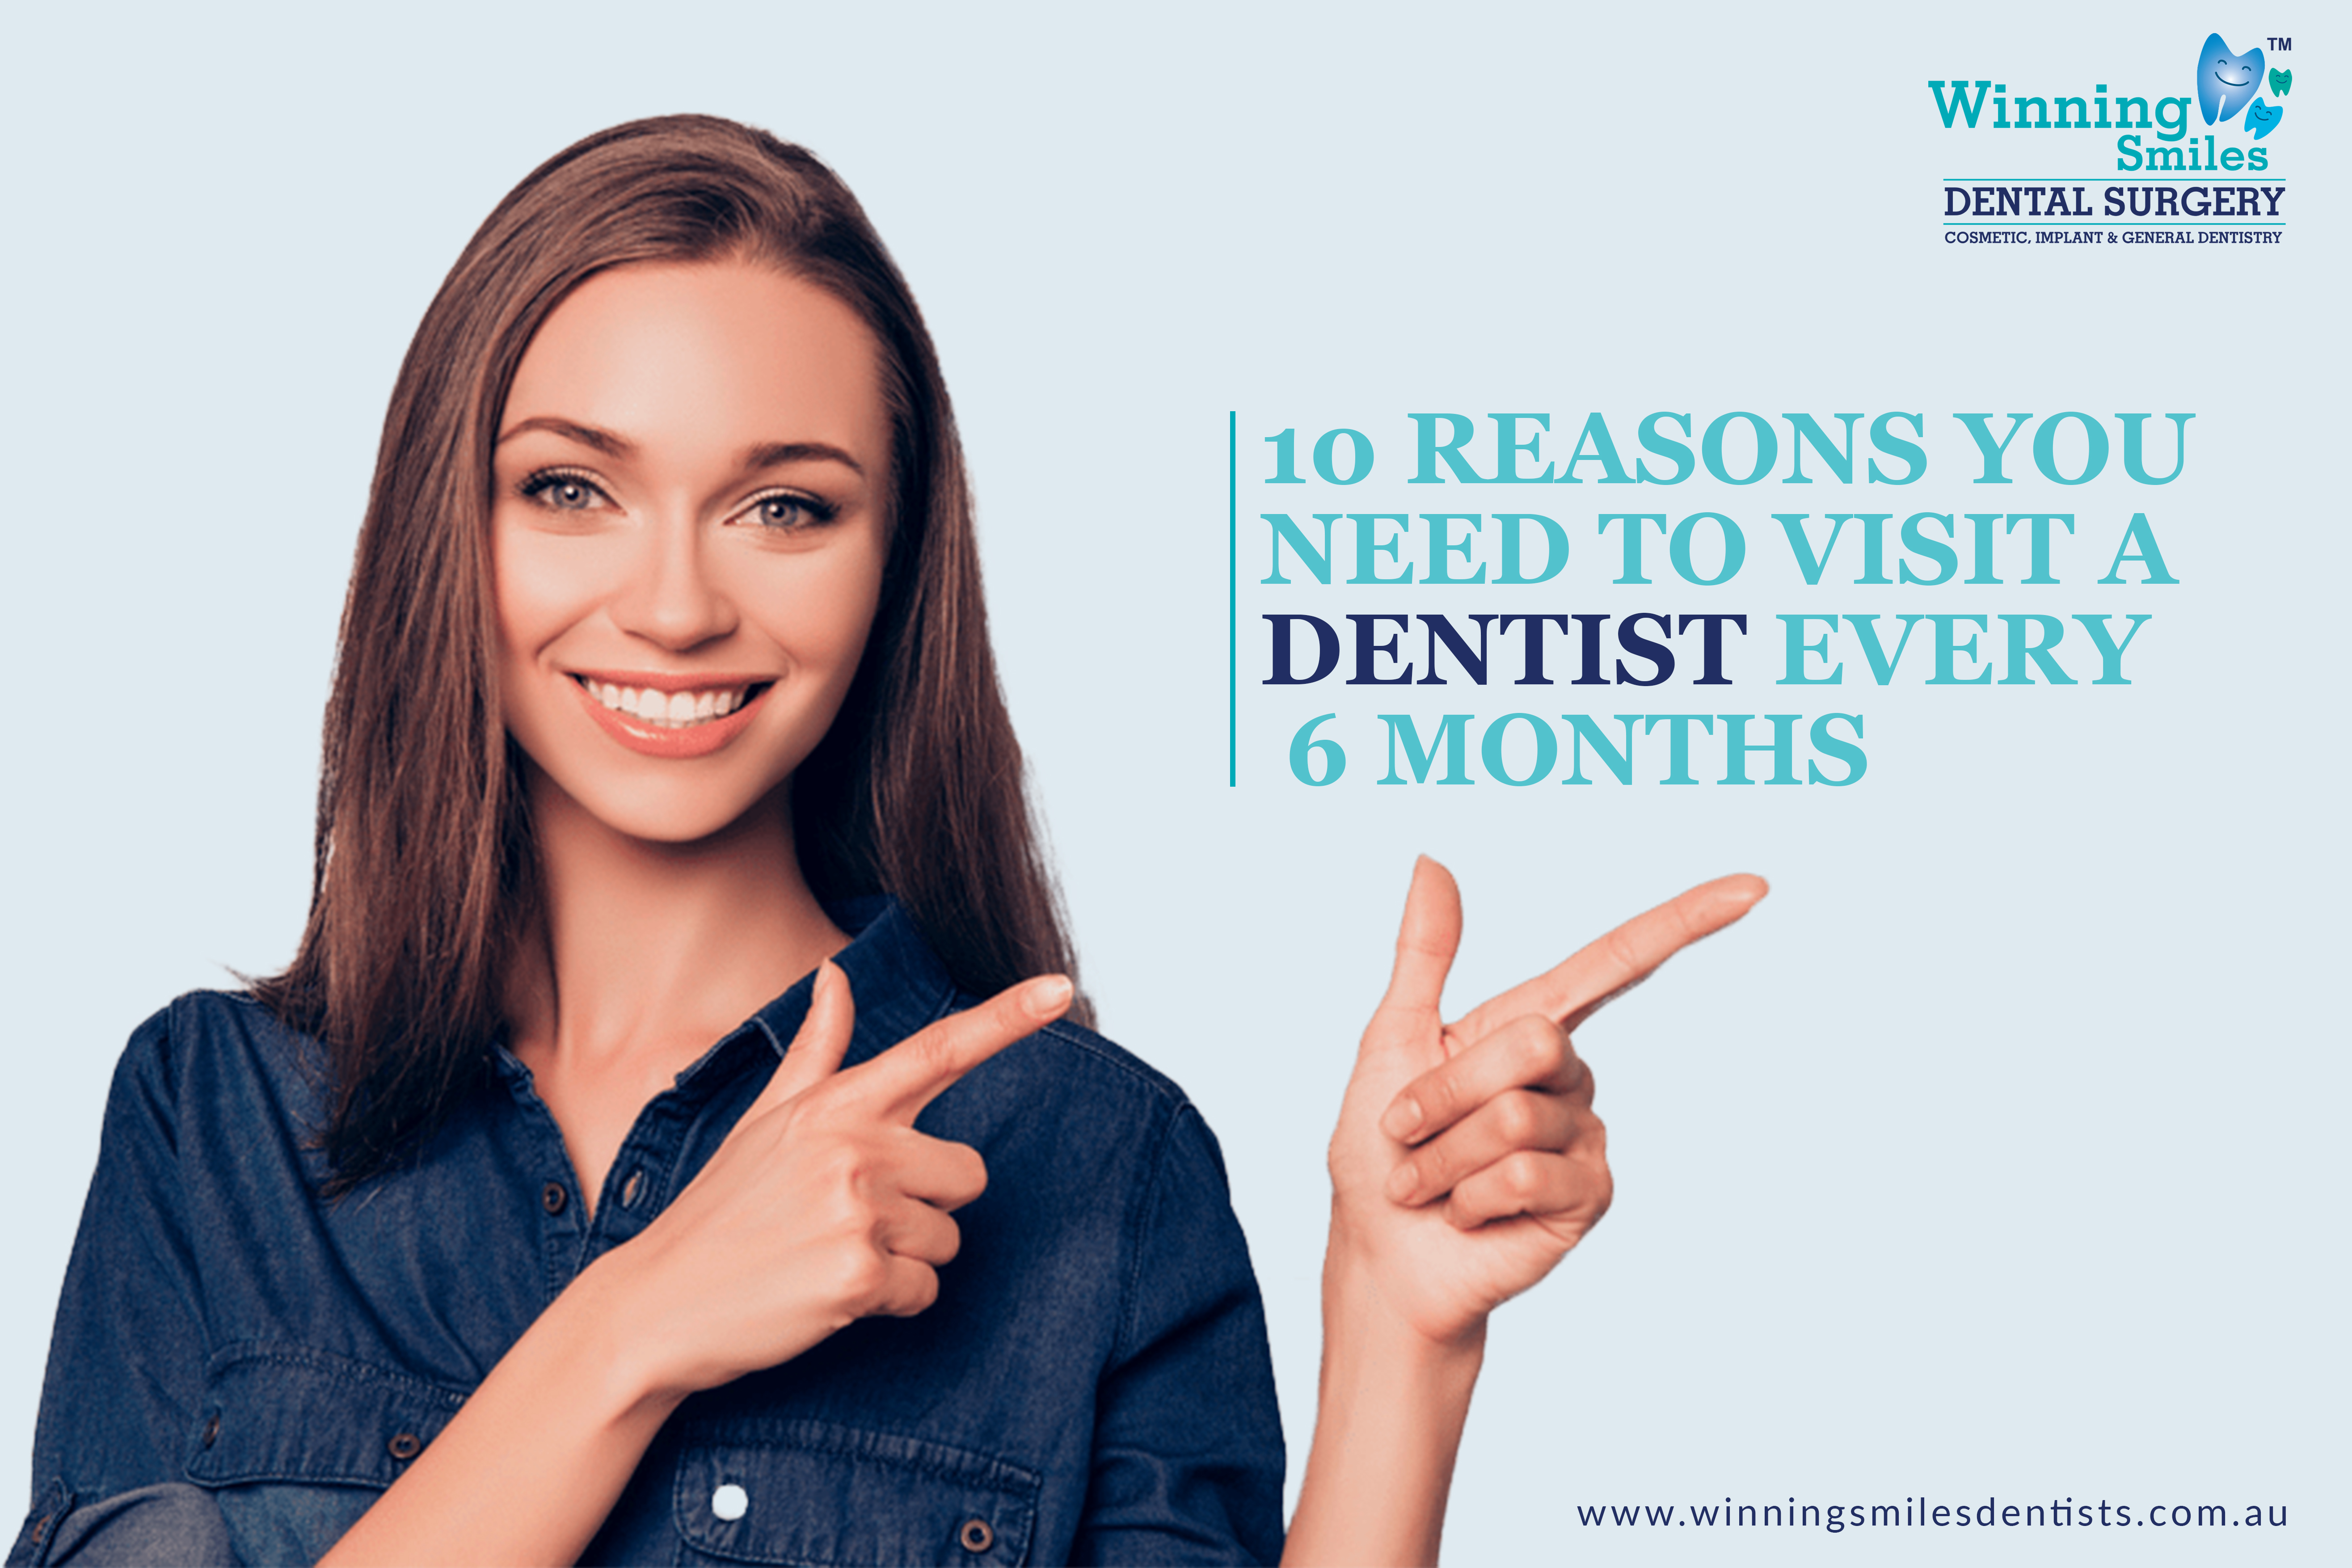 10 Reasons You Need to Visit a Dentist Every 6 Months